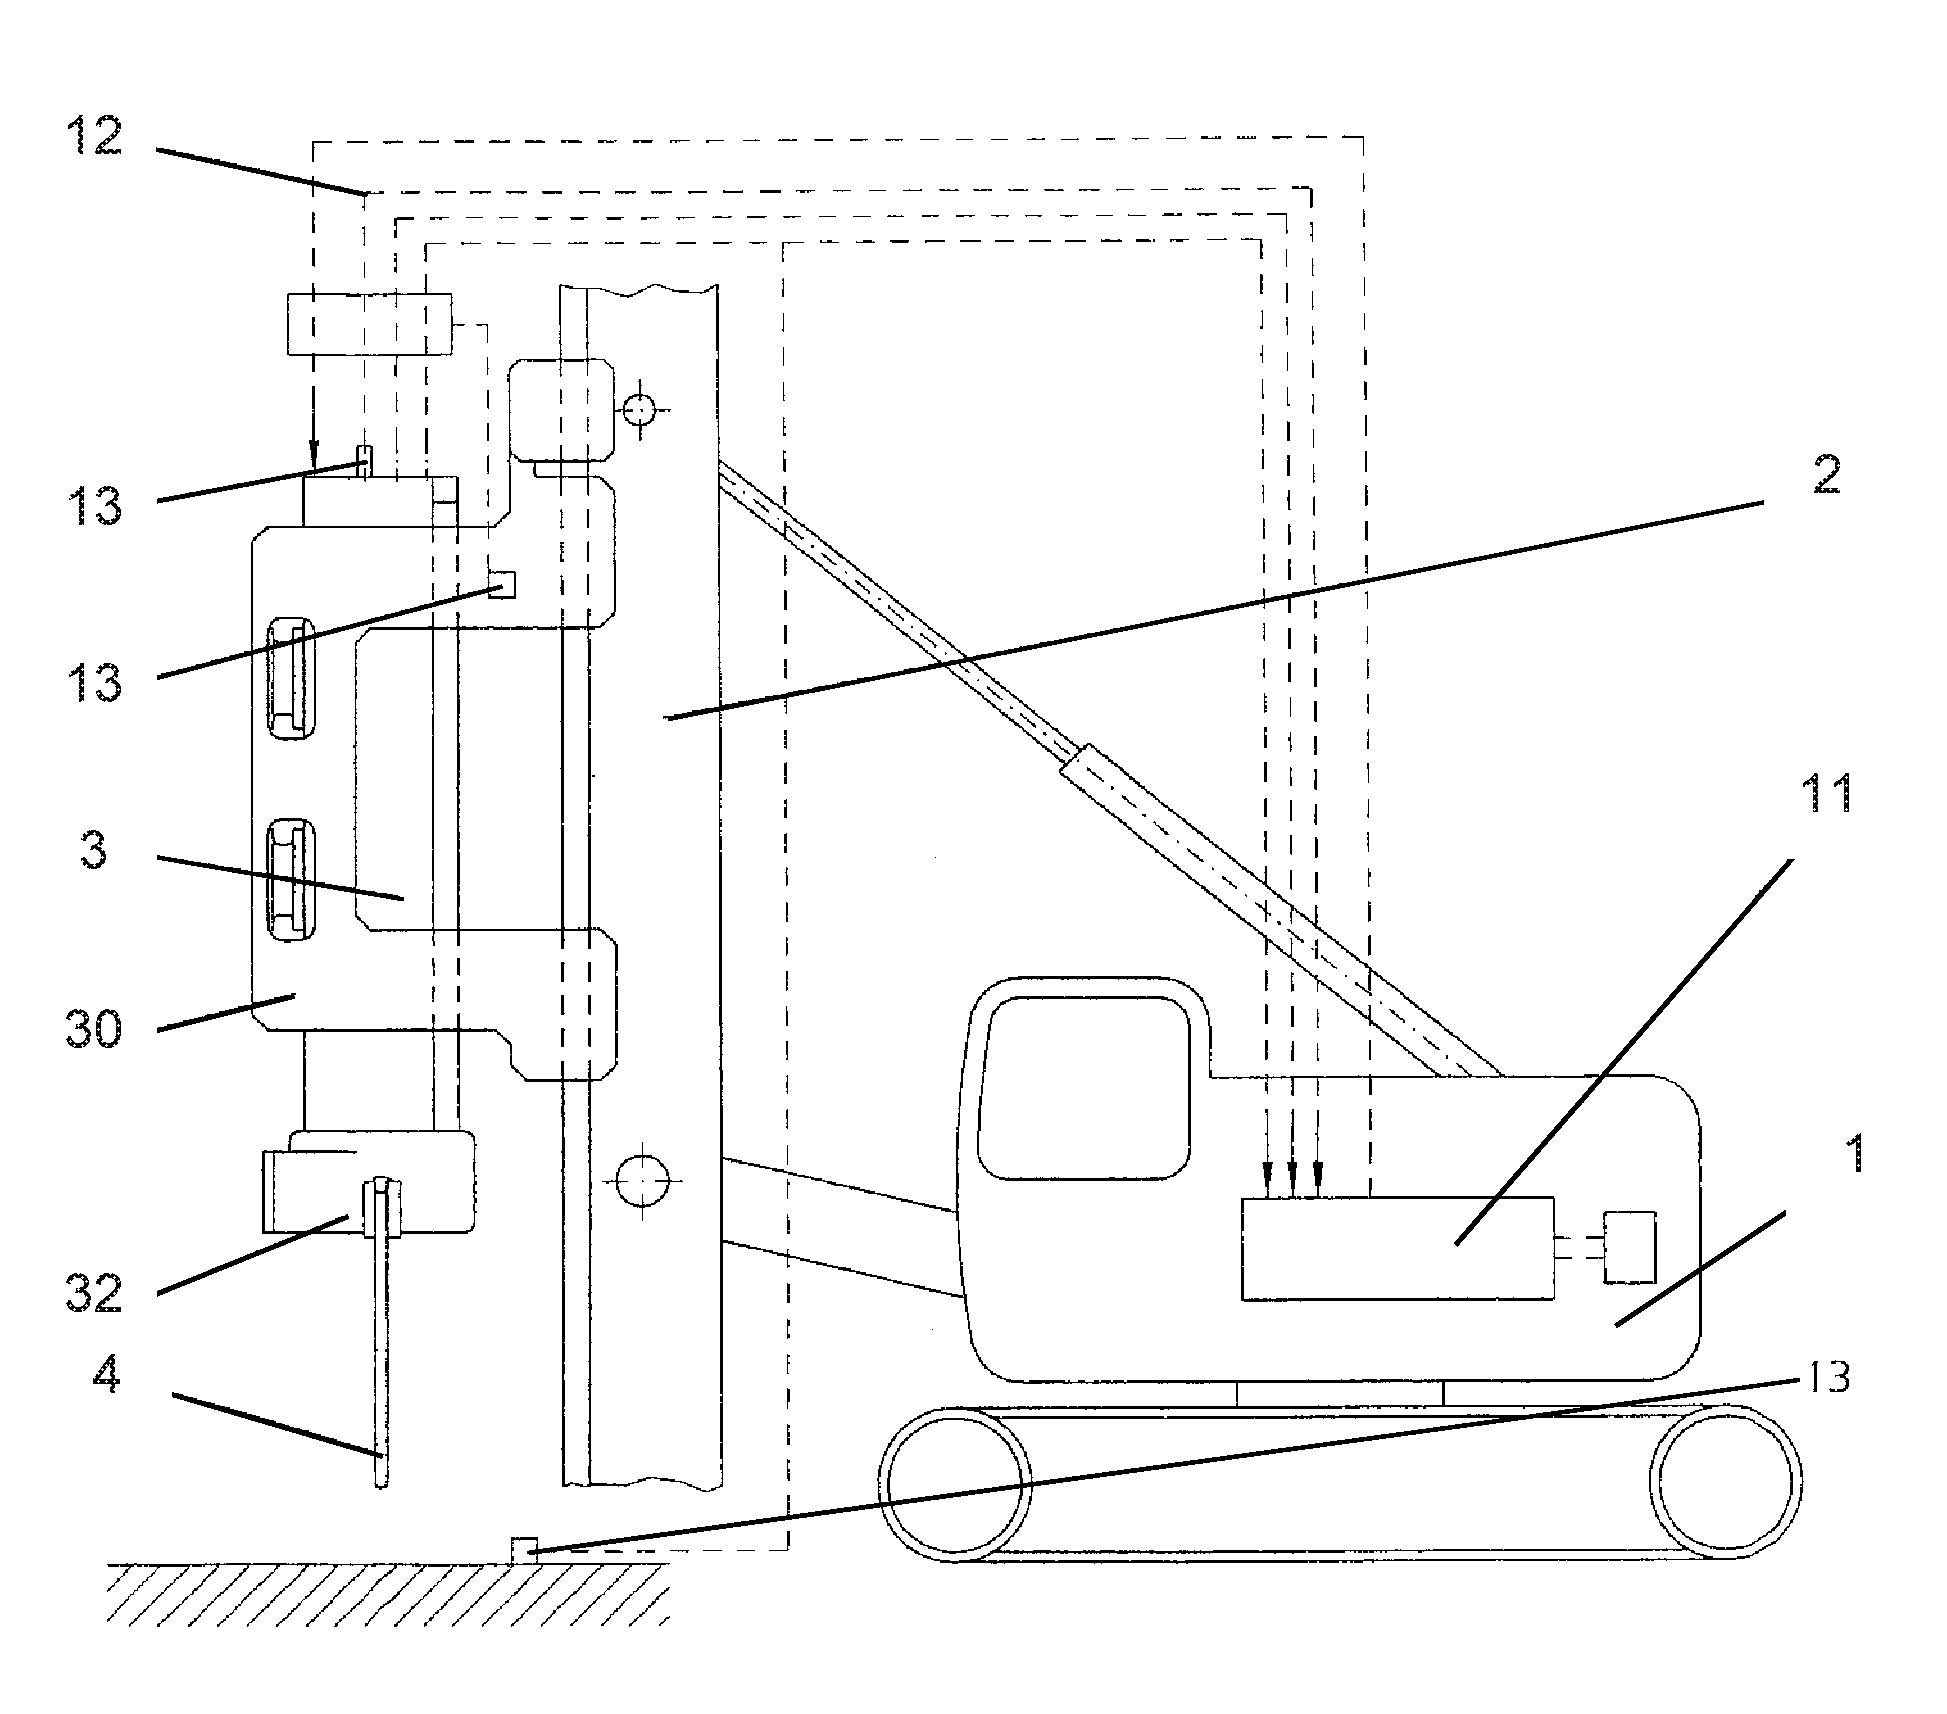 Apparatus for pile-driving or drilling